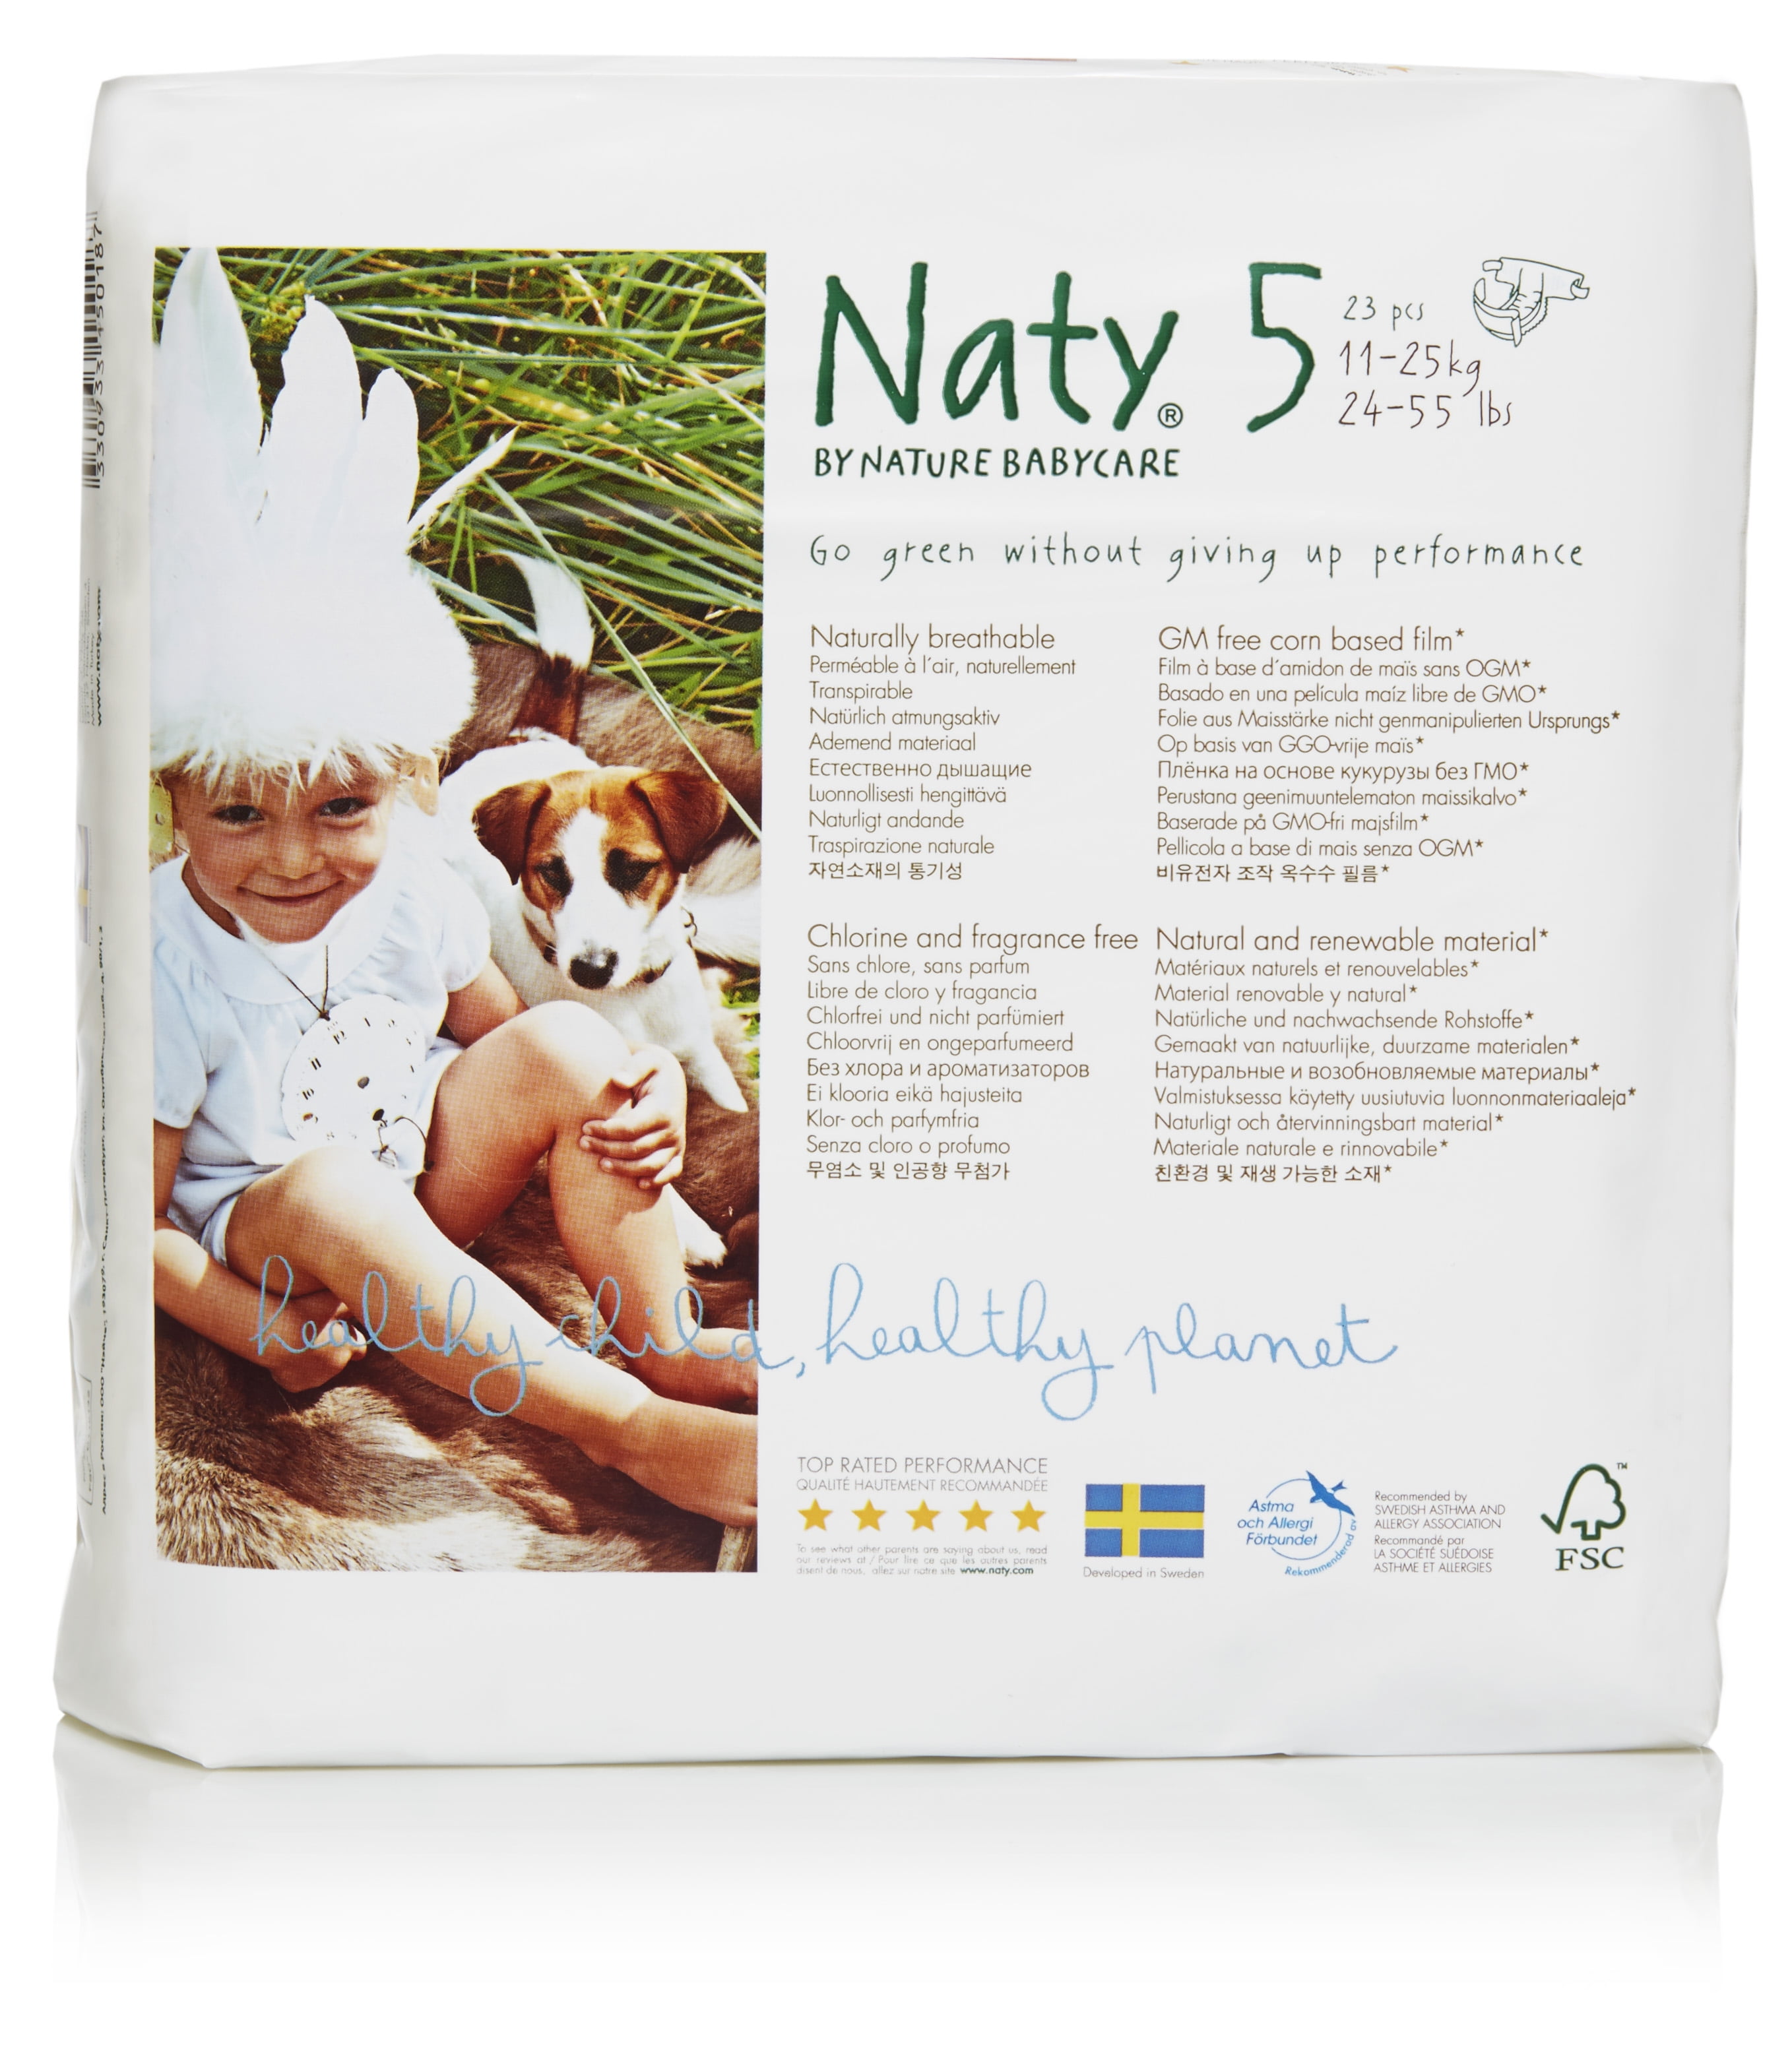 11-25 kg size 5 Eco by naty premium disposable diapers for sensitive skin 1 pack of 22